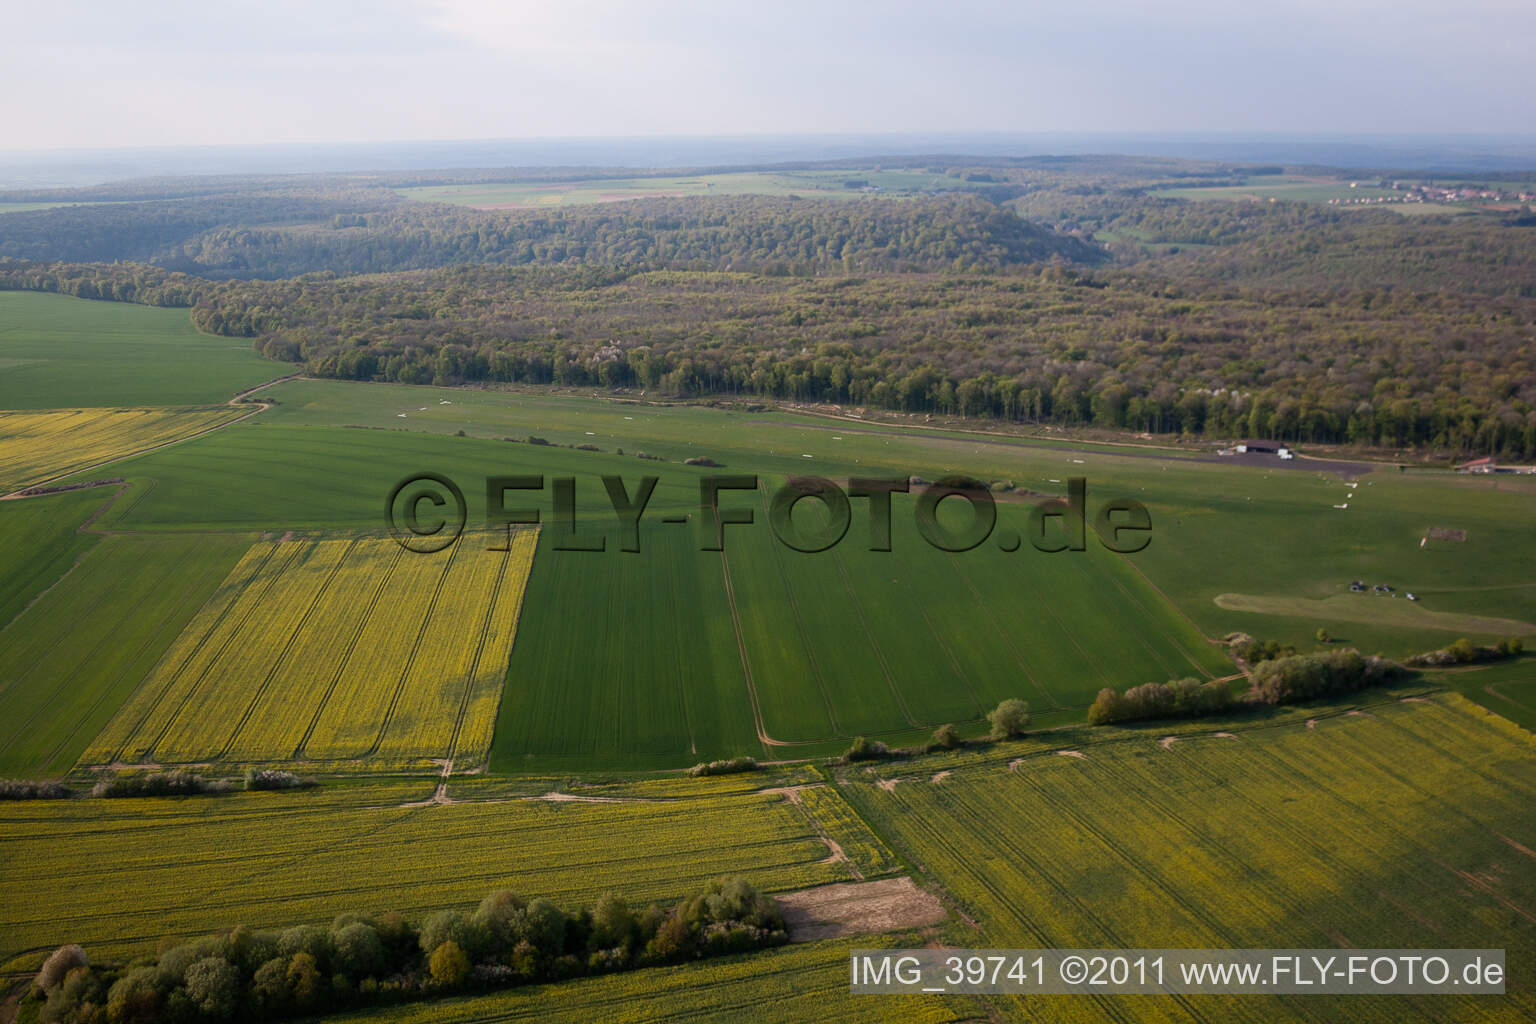 Aerodrome airfield in Villette in the state Meurthe et Moselle, France